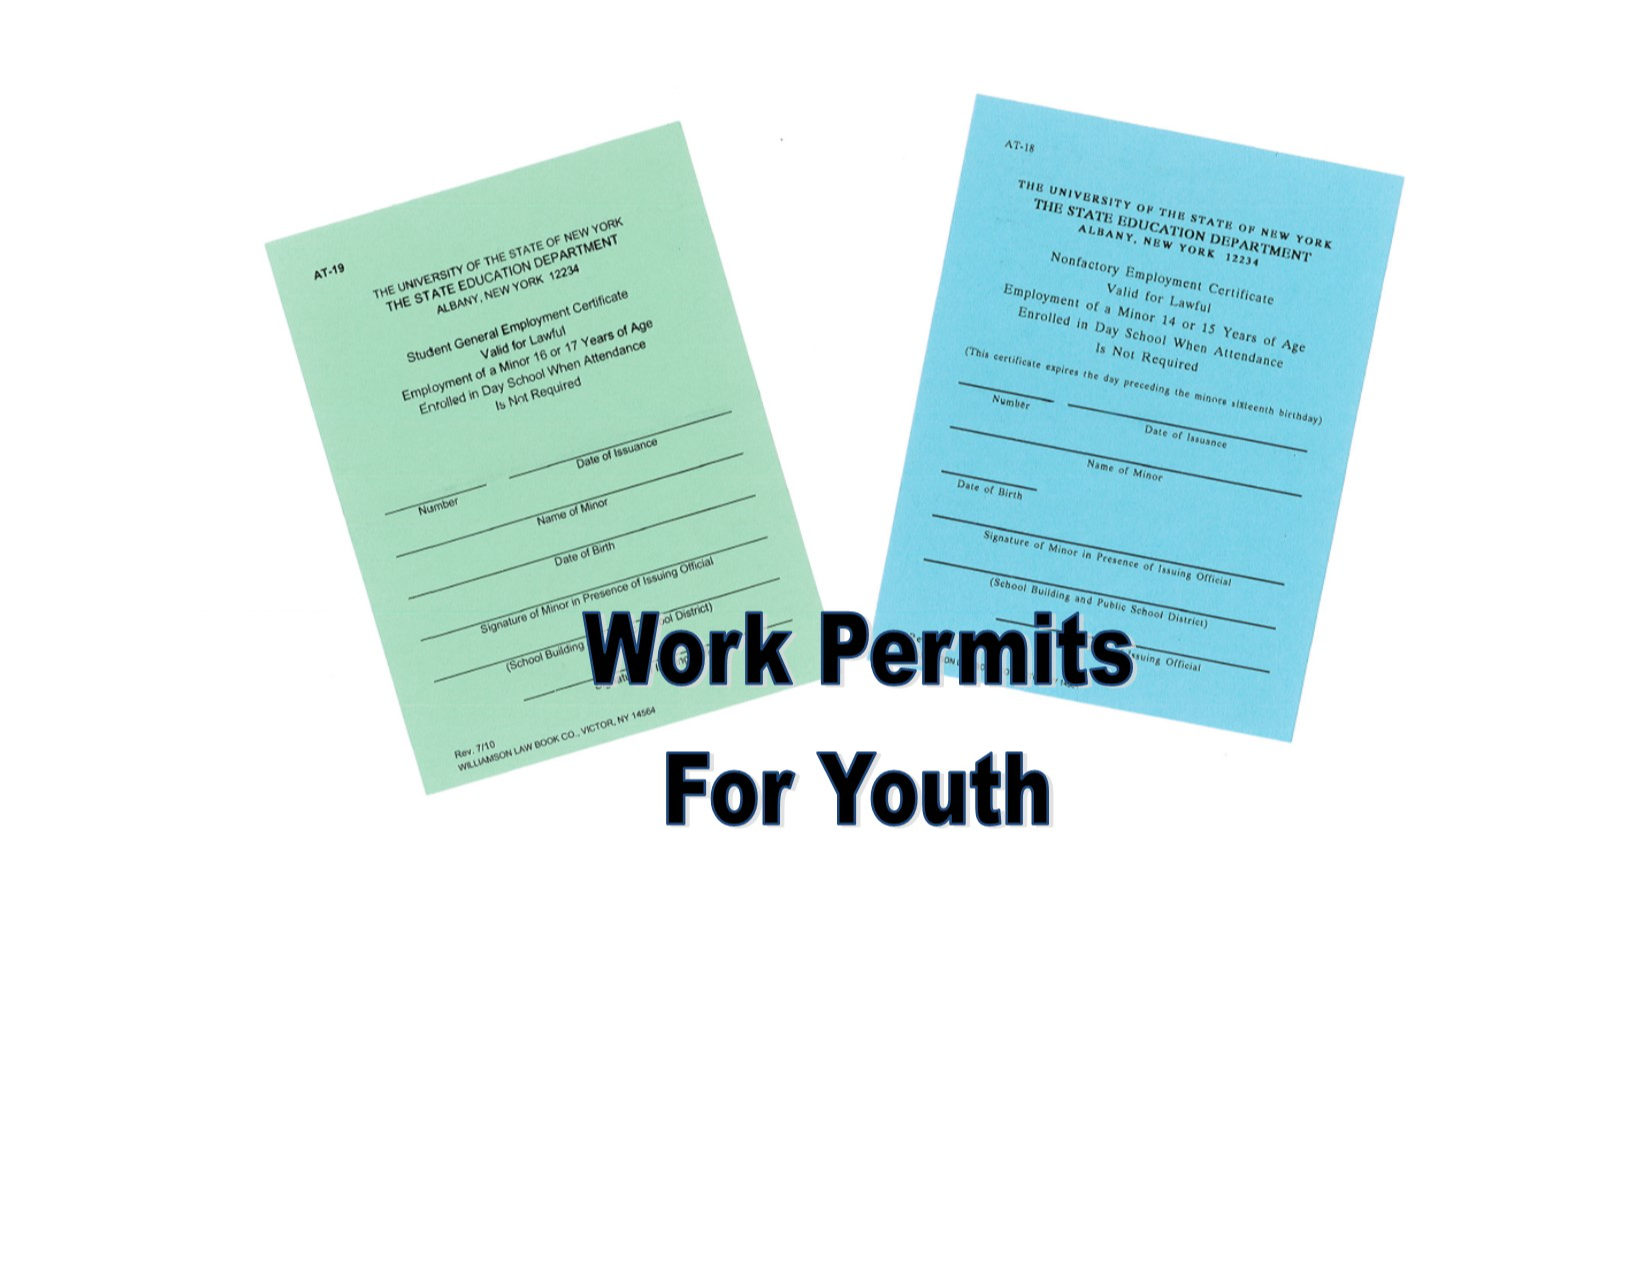 Working Permit for Youth